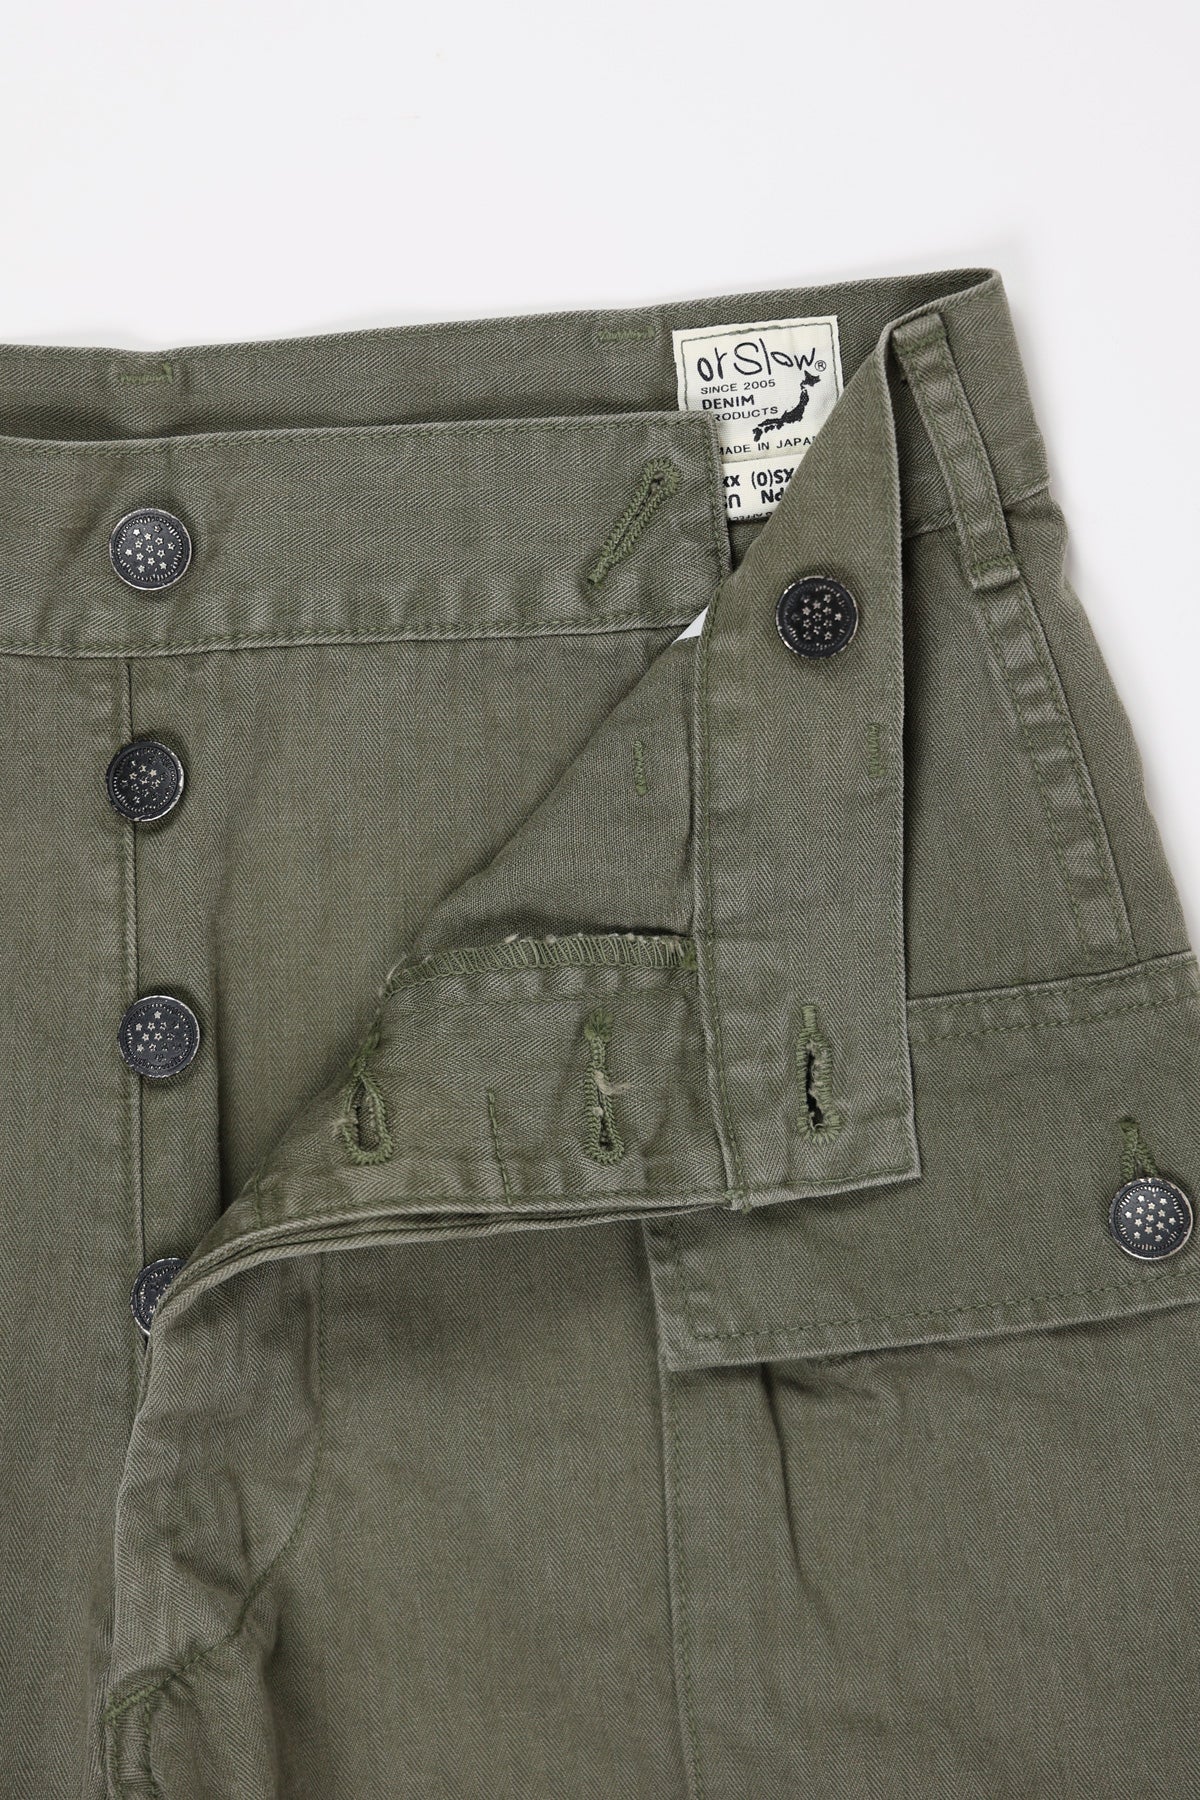 OrSlow US Army 2 Pocket Cargo Pants, Green